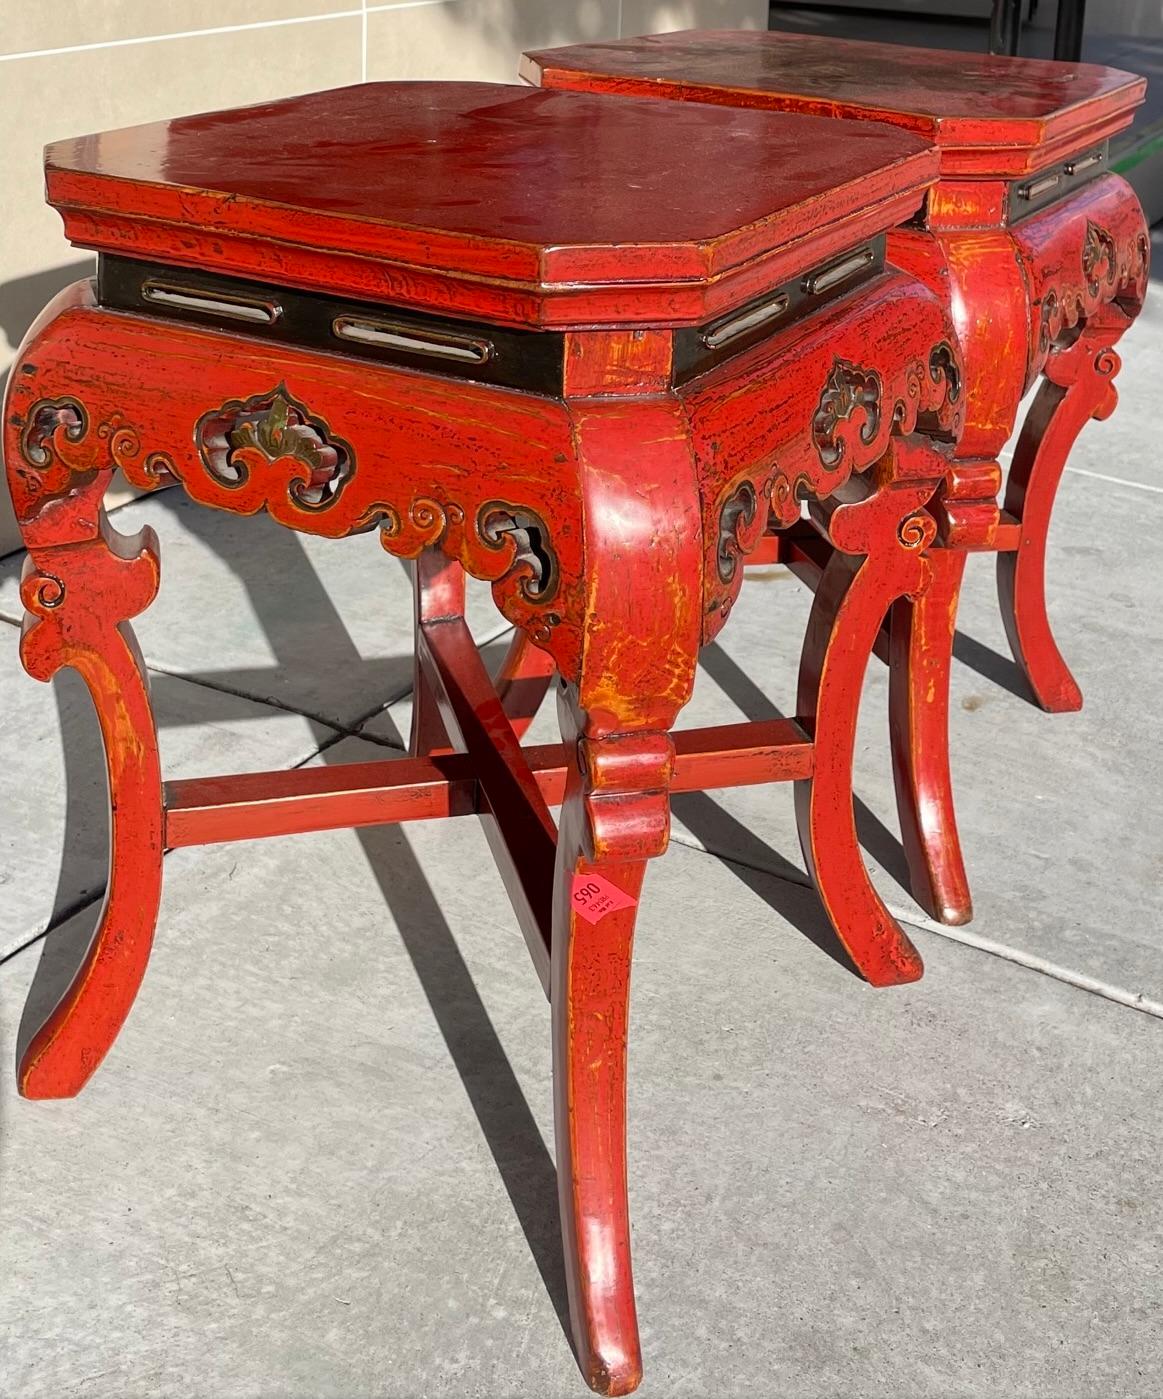 Exquisite pair of rare Fijian side tables. The color of these tables is very nearly a Diana Vreeland red and would certainly have looked right at home in one of her storied interiors.